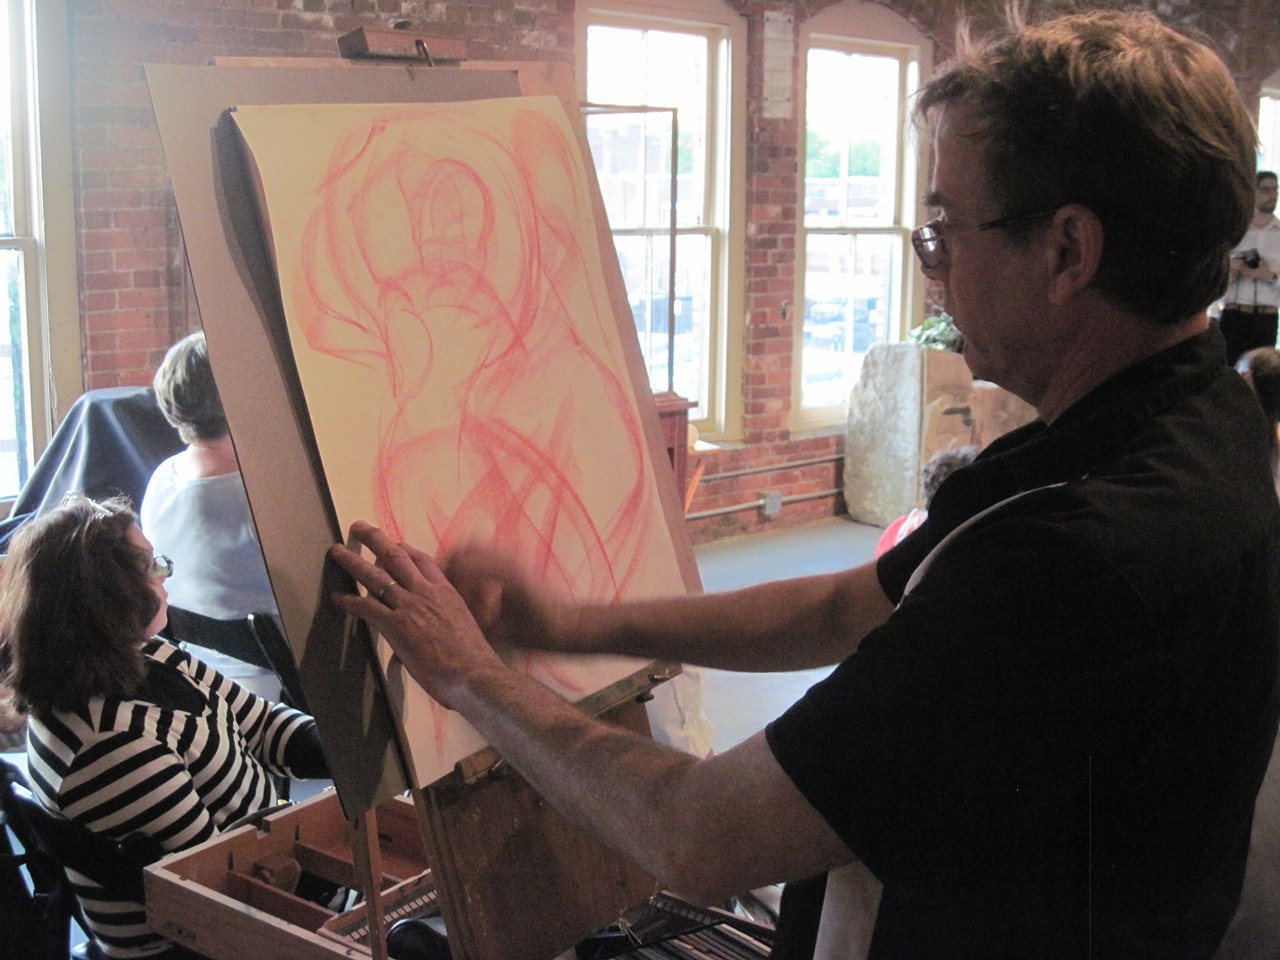 Several artists used easels during the event.